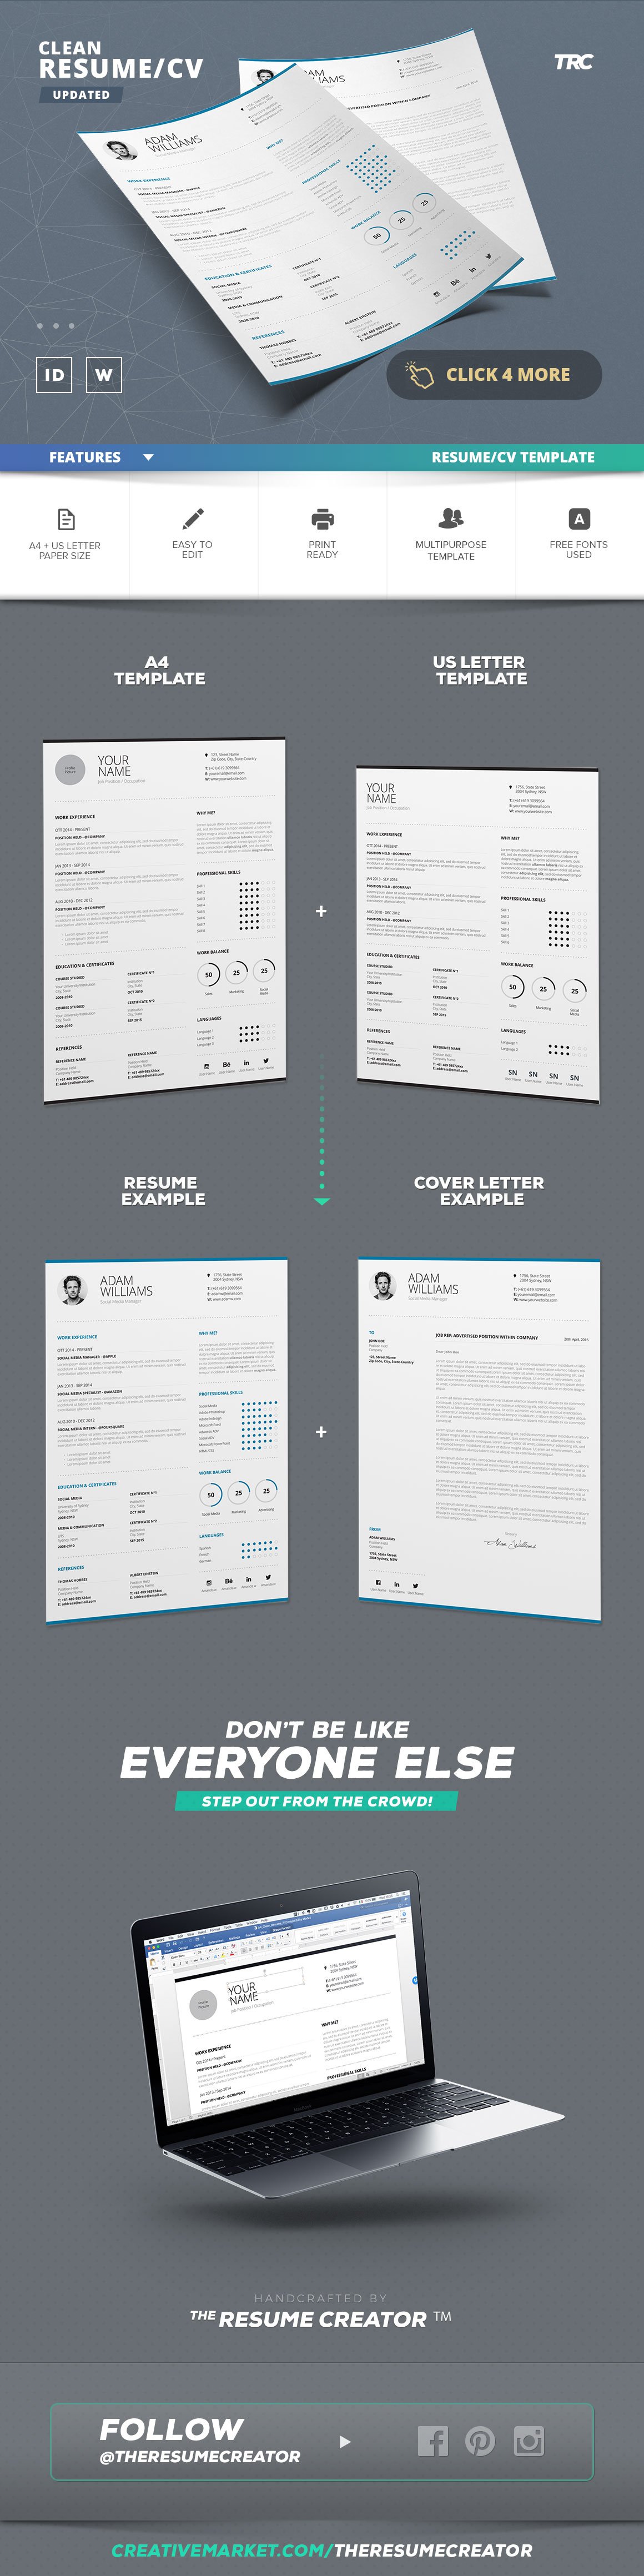 Clean Resume/Cv Template Volume 7 preview image.